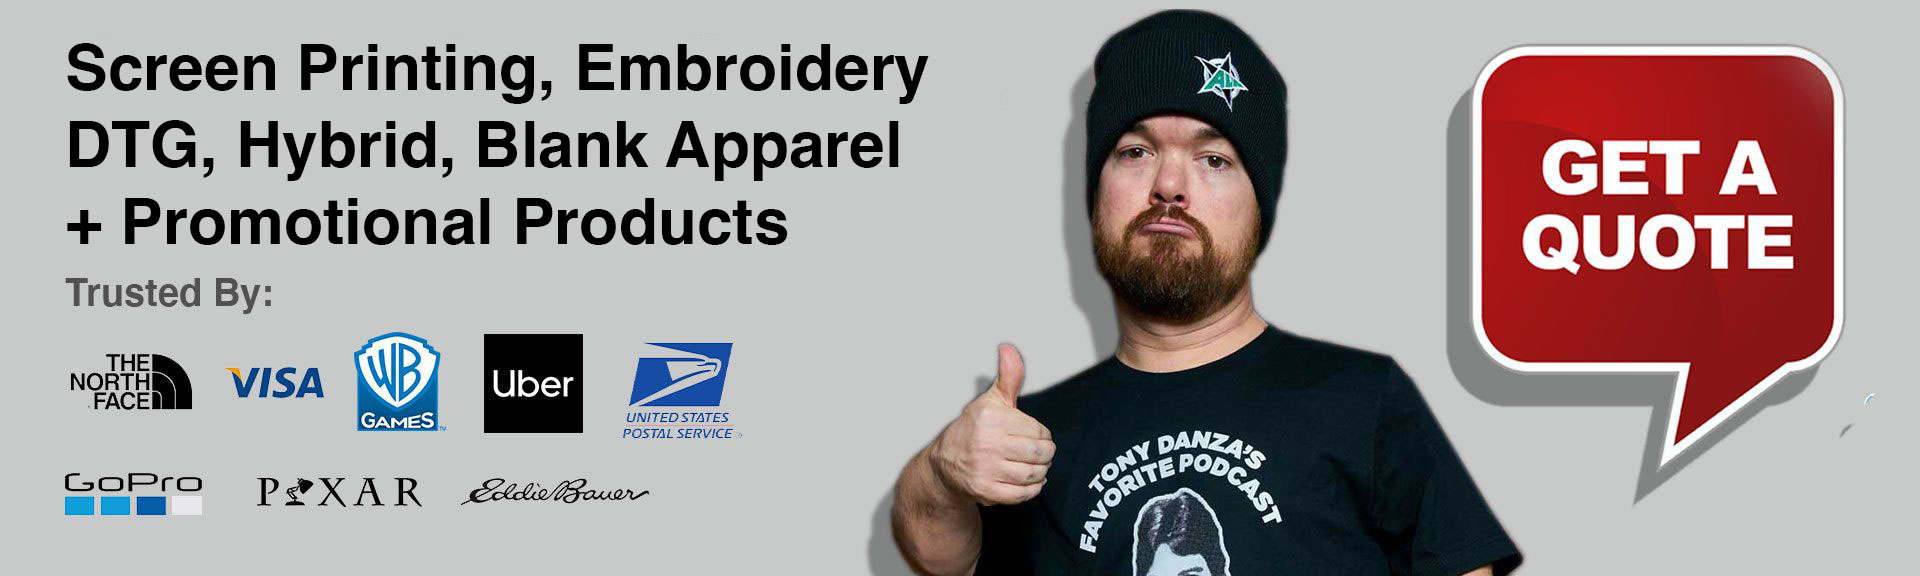 Screen Printing, Embroidery DTG, Hybrid, Blank Apparel + Promotional Products - Get A Quote Today